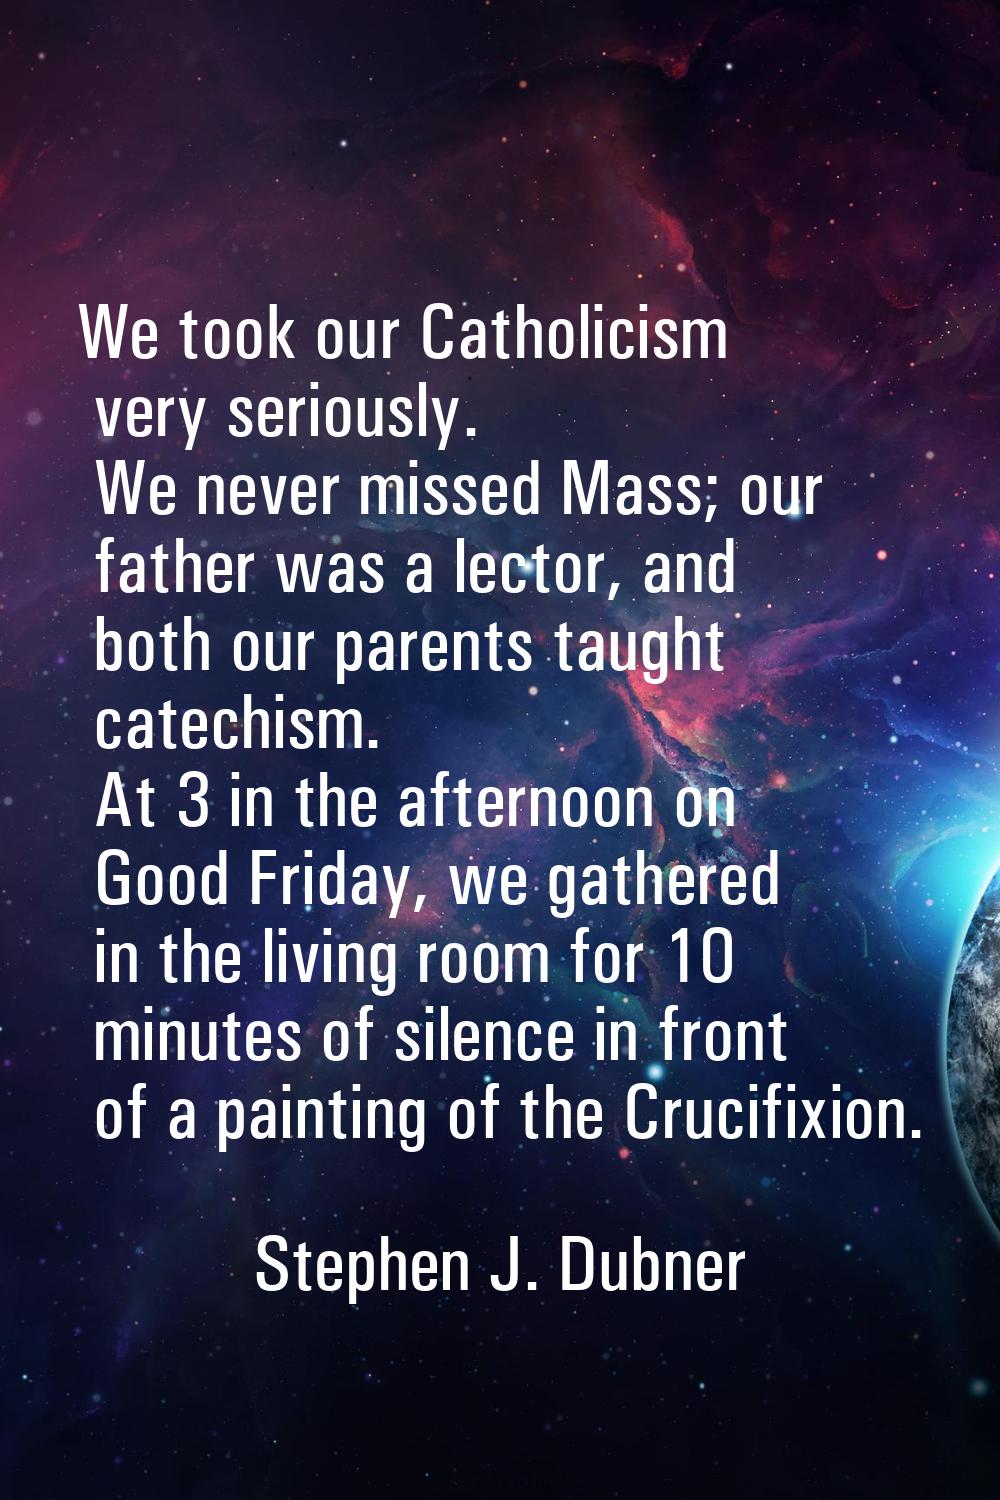 We took our Catholicism very seriously. We never missed Mass; our father was a lector, and both our